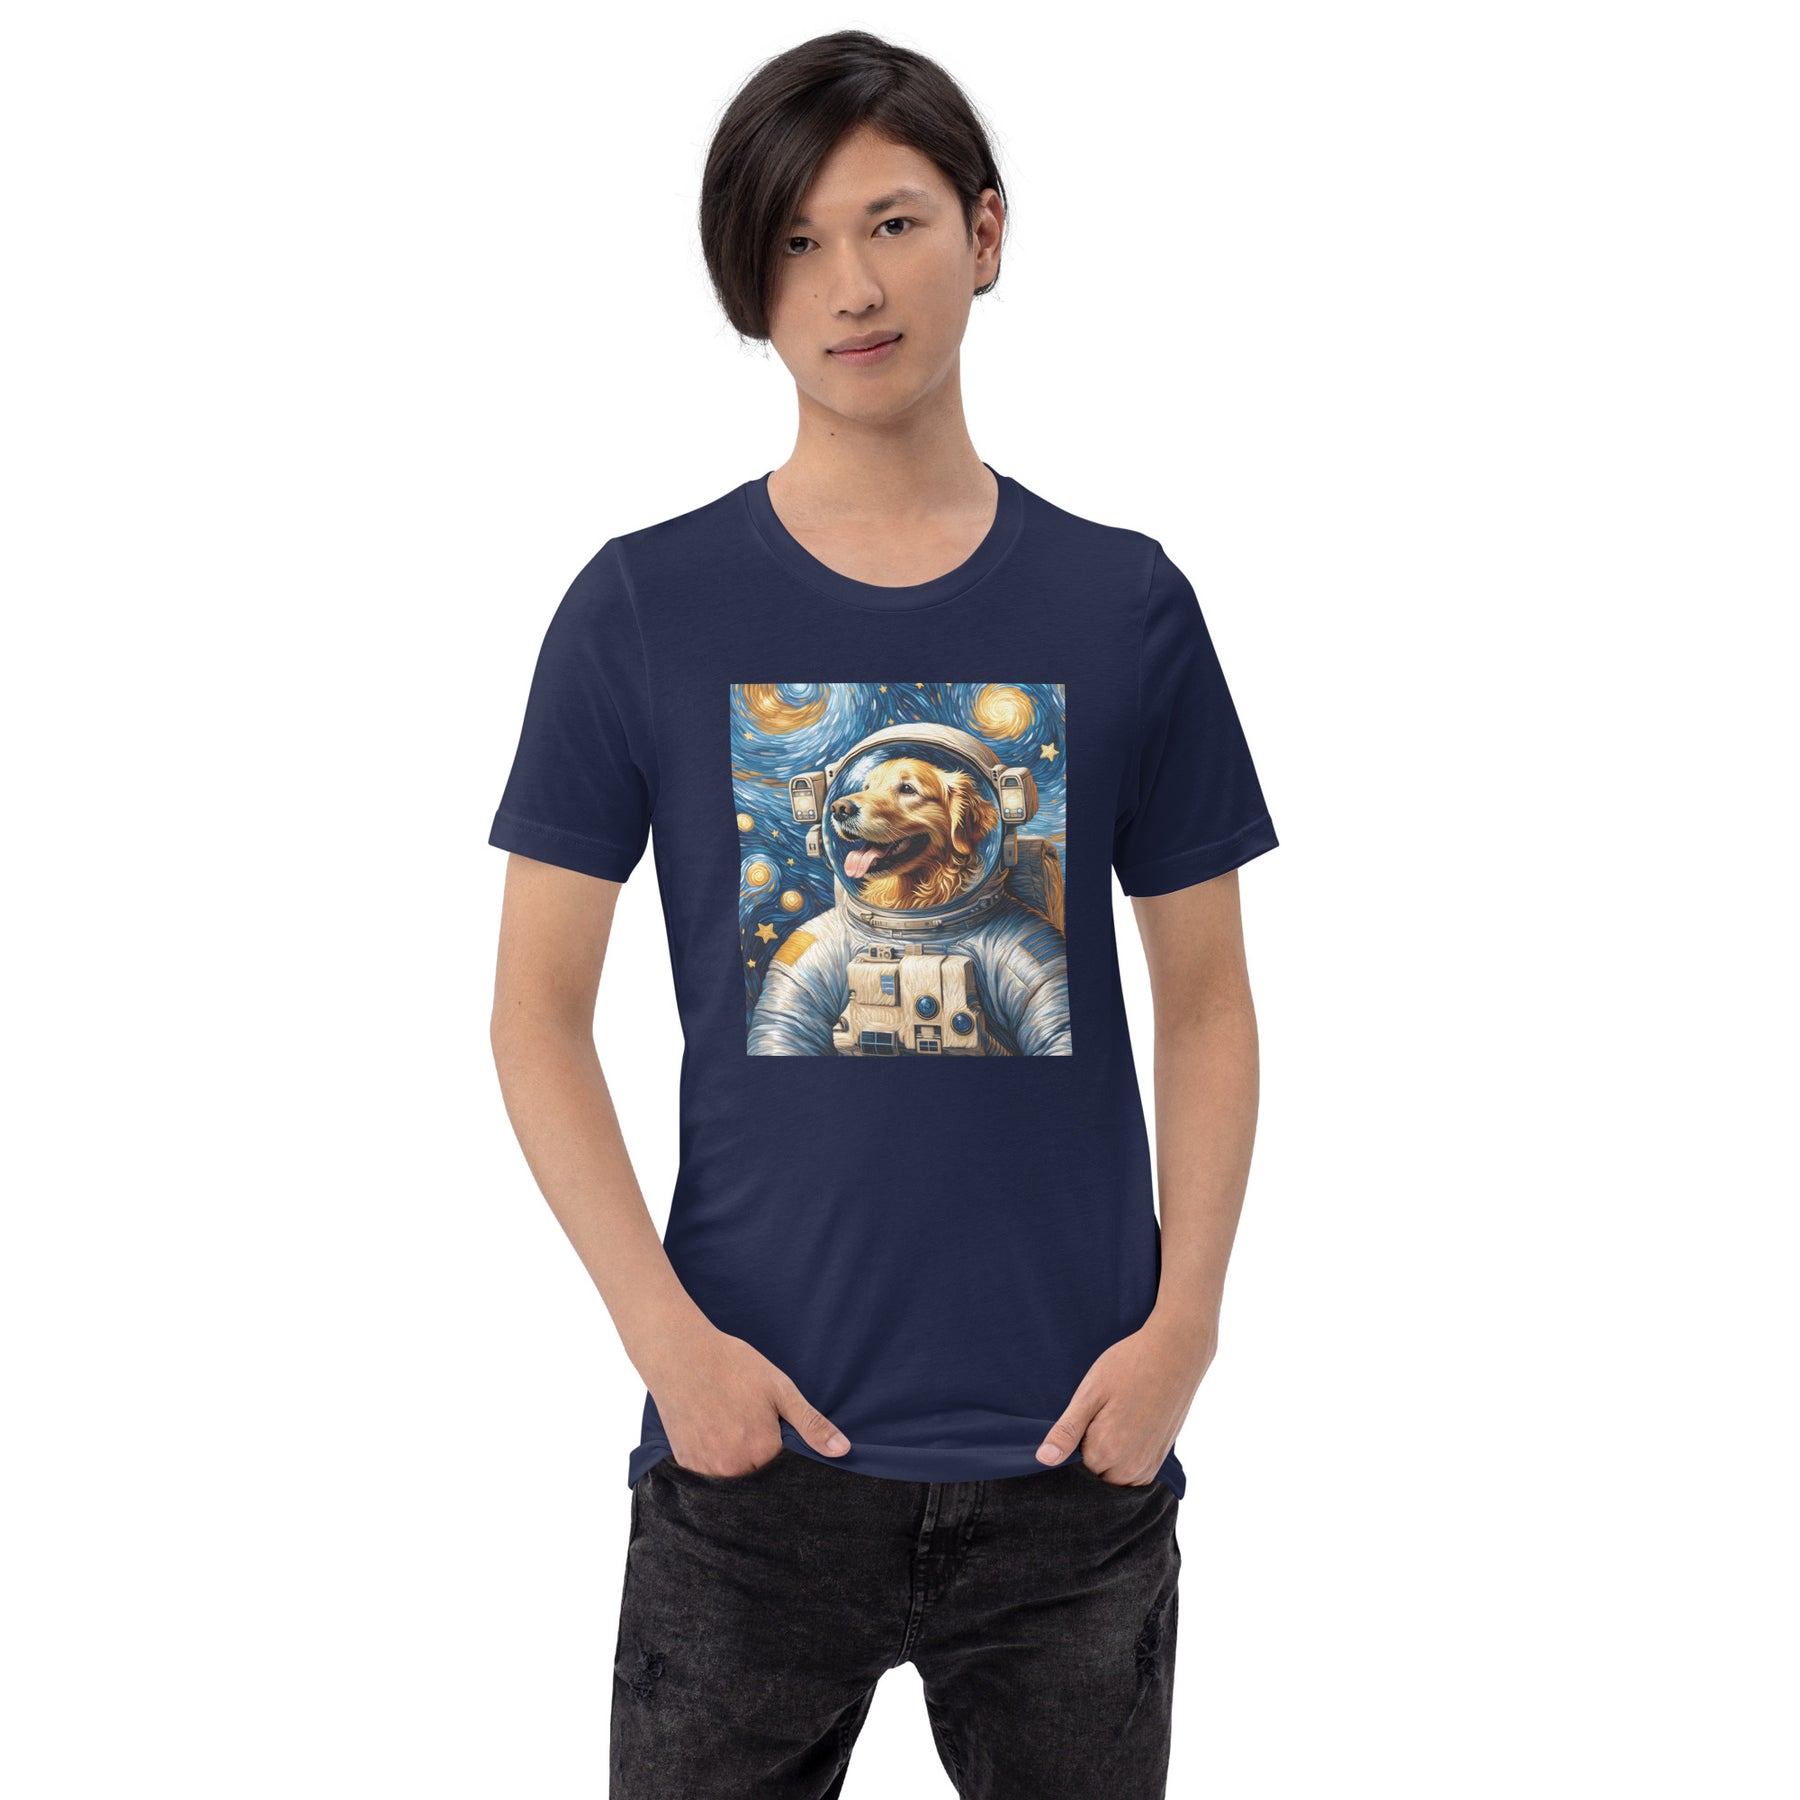 Space Dog Astronaut Shirt, Funny Outer Space Tee for Golden Retriever Lovers, Cosmic Dog T-Shirt, Astronomy Enthusiasts, Galaxy-Themed Gift